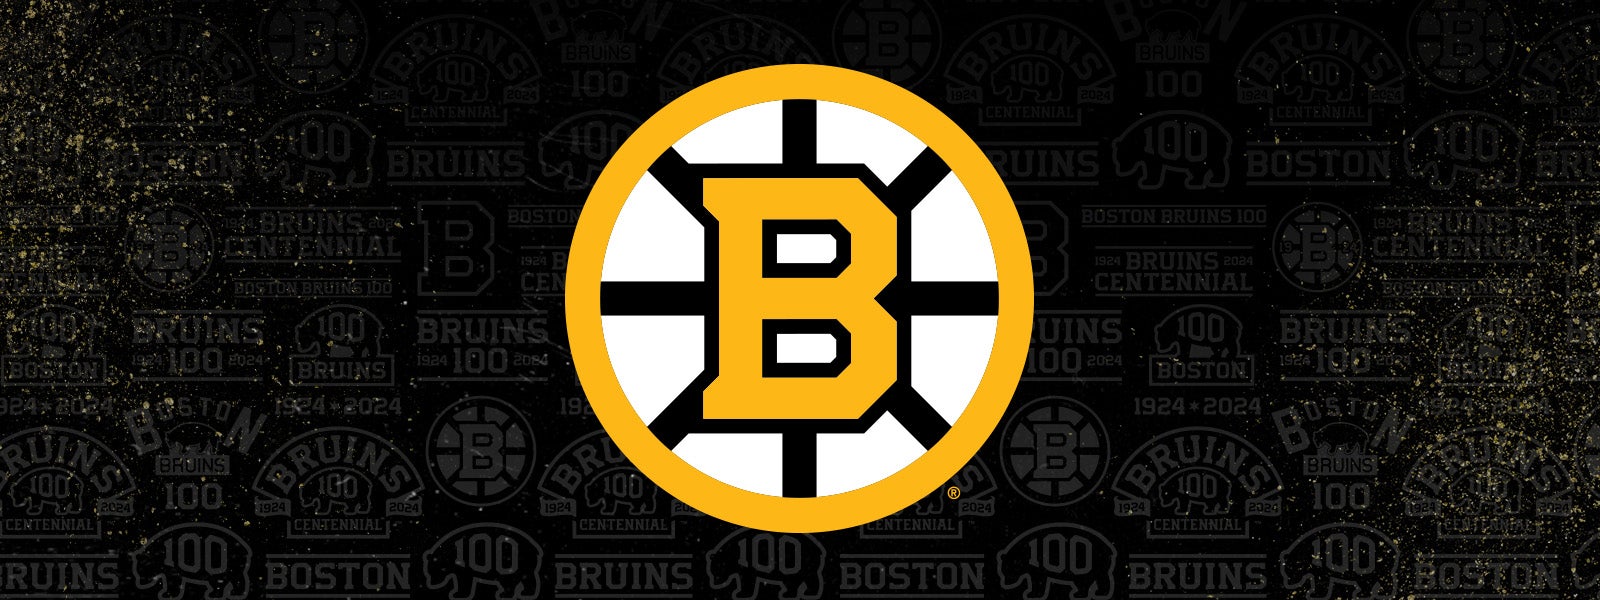 Boston Bruins - Game day! Celebrate Irish Heritage Night at TD Garden as  the Bruins take on the Red Wings at 7PM ET. Preview the game:   📺 NESN, NBCSN 📲 NESNgo